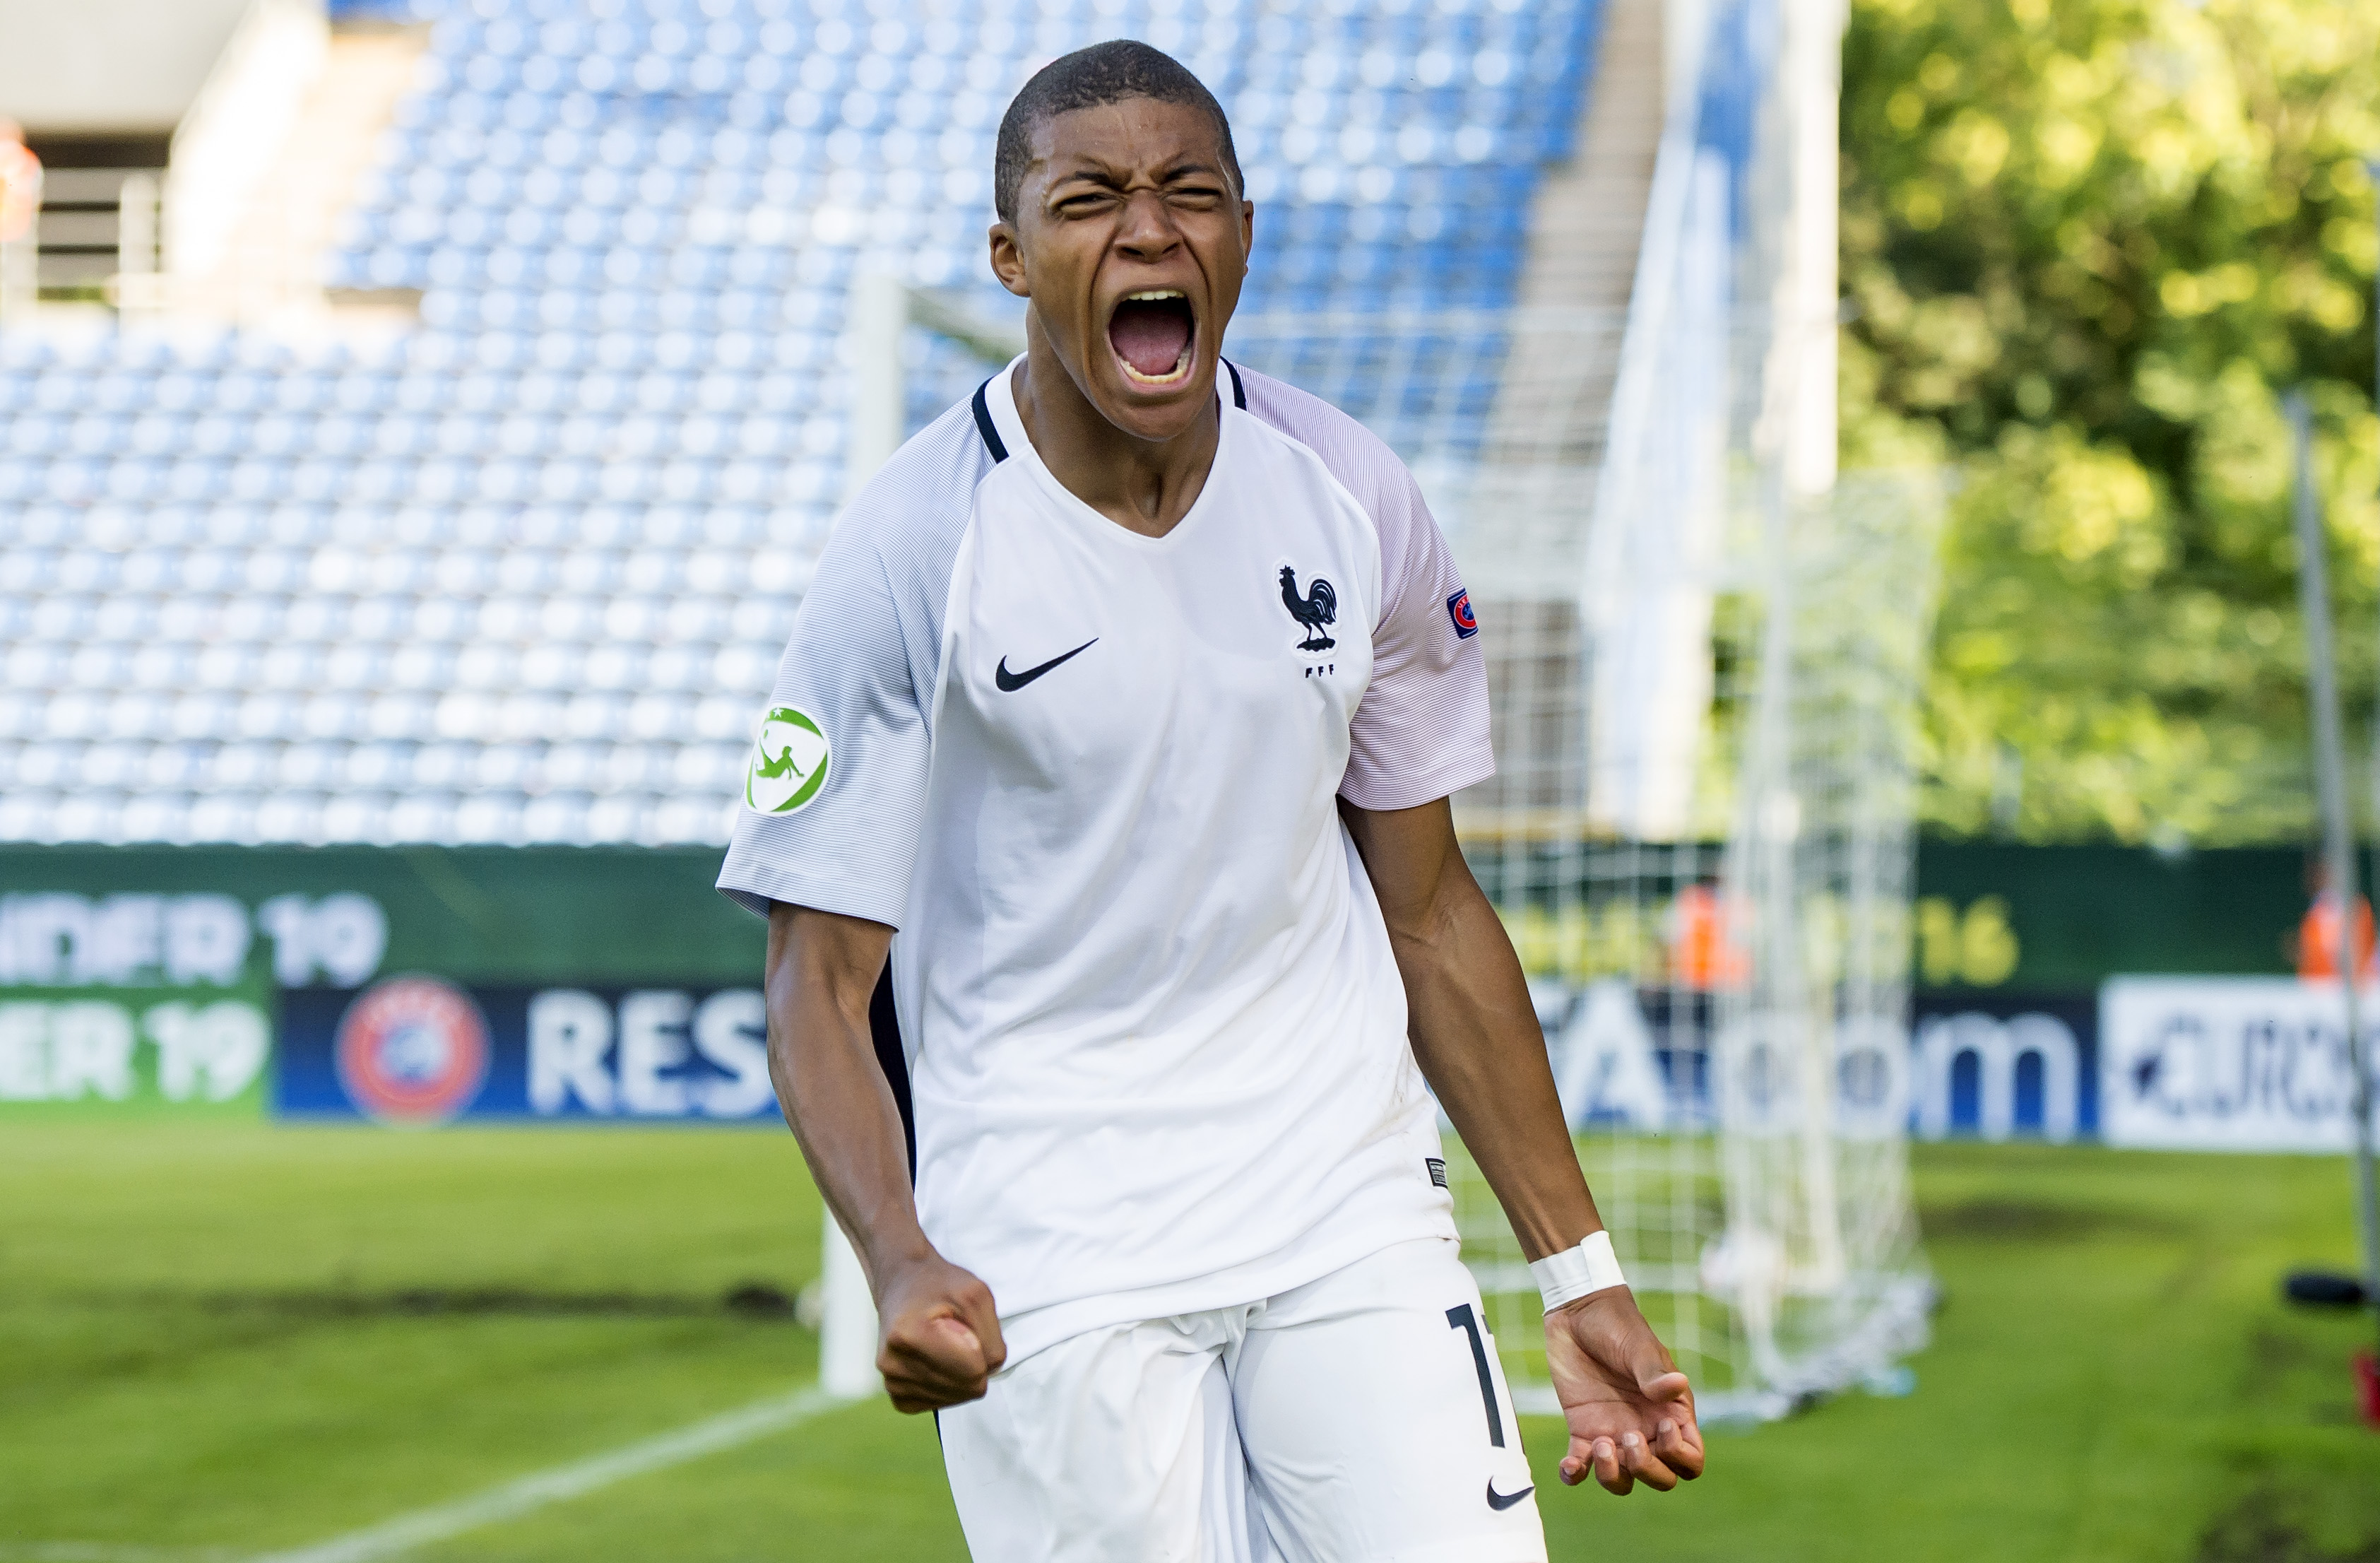 MANNHEIM, GERMANY - JULY 21: Kylian Mbappe of France celebrates the second goal for his team during the U19 match between Portugal and France at Carl-Benz-Stadium on July 21, 2016 in Mannheim, Germany. (Photo by Alexander Scheuber/Bongarts/Getty Images)